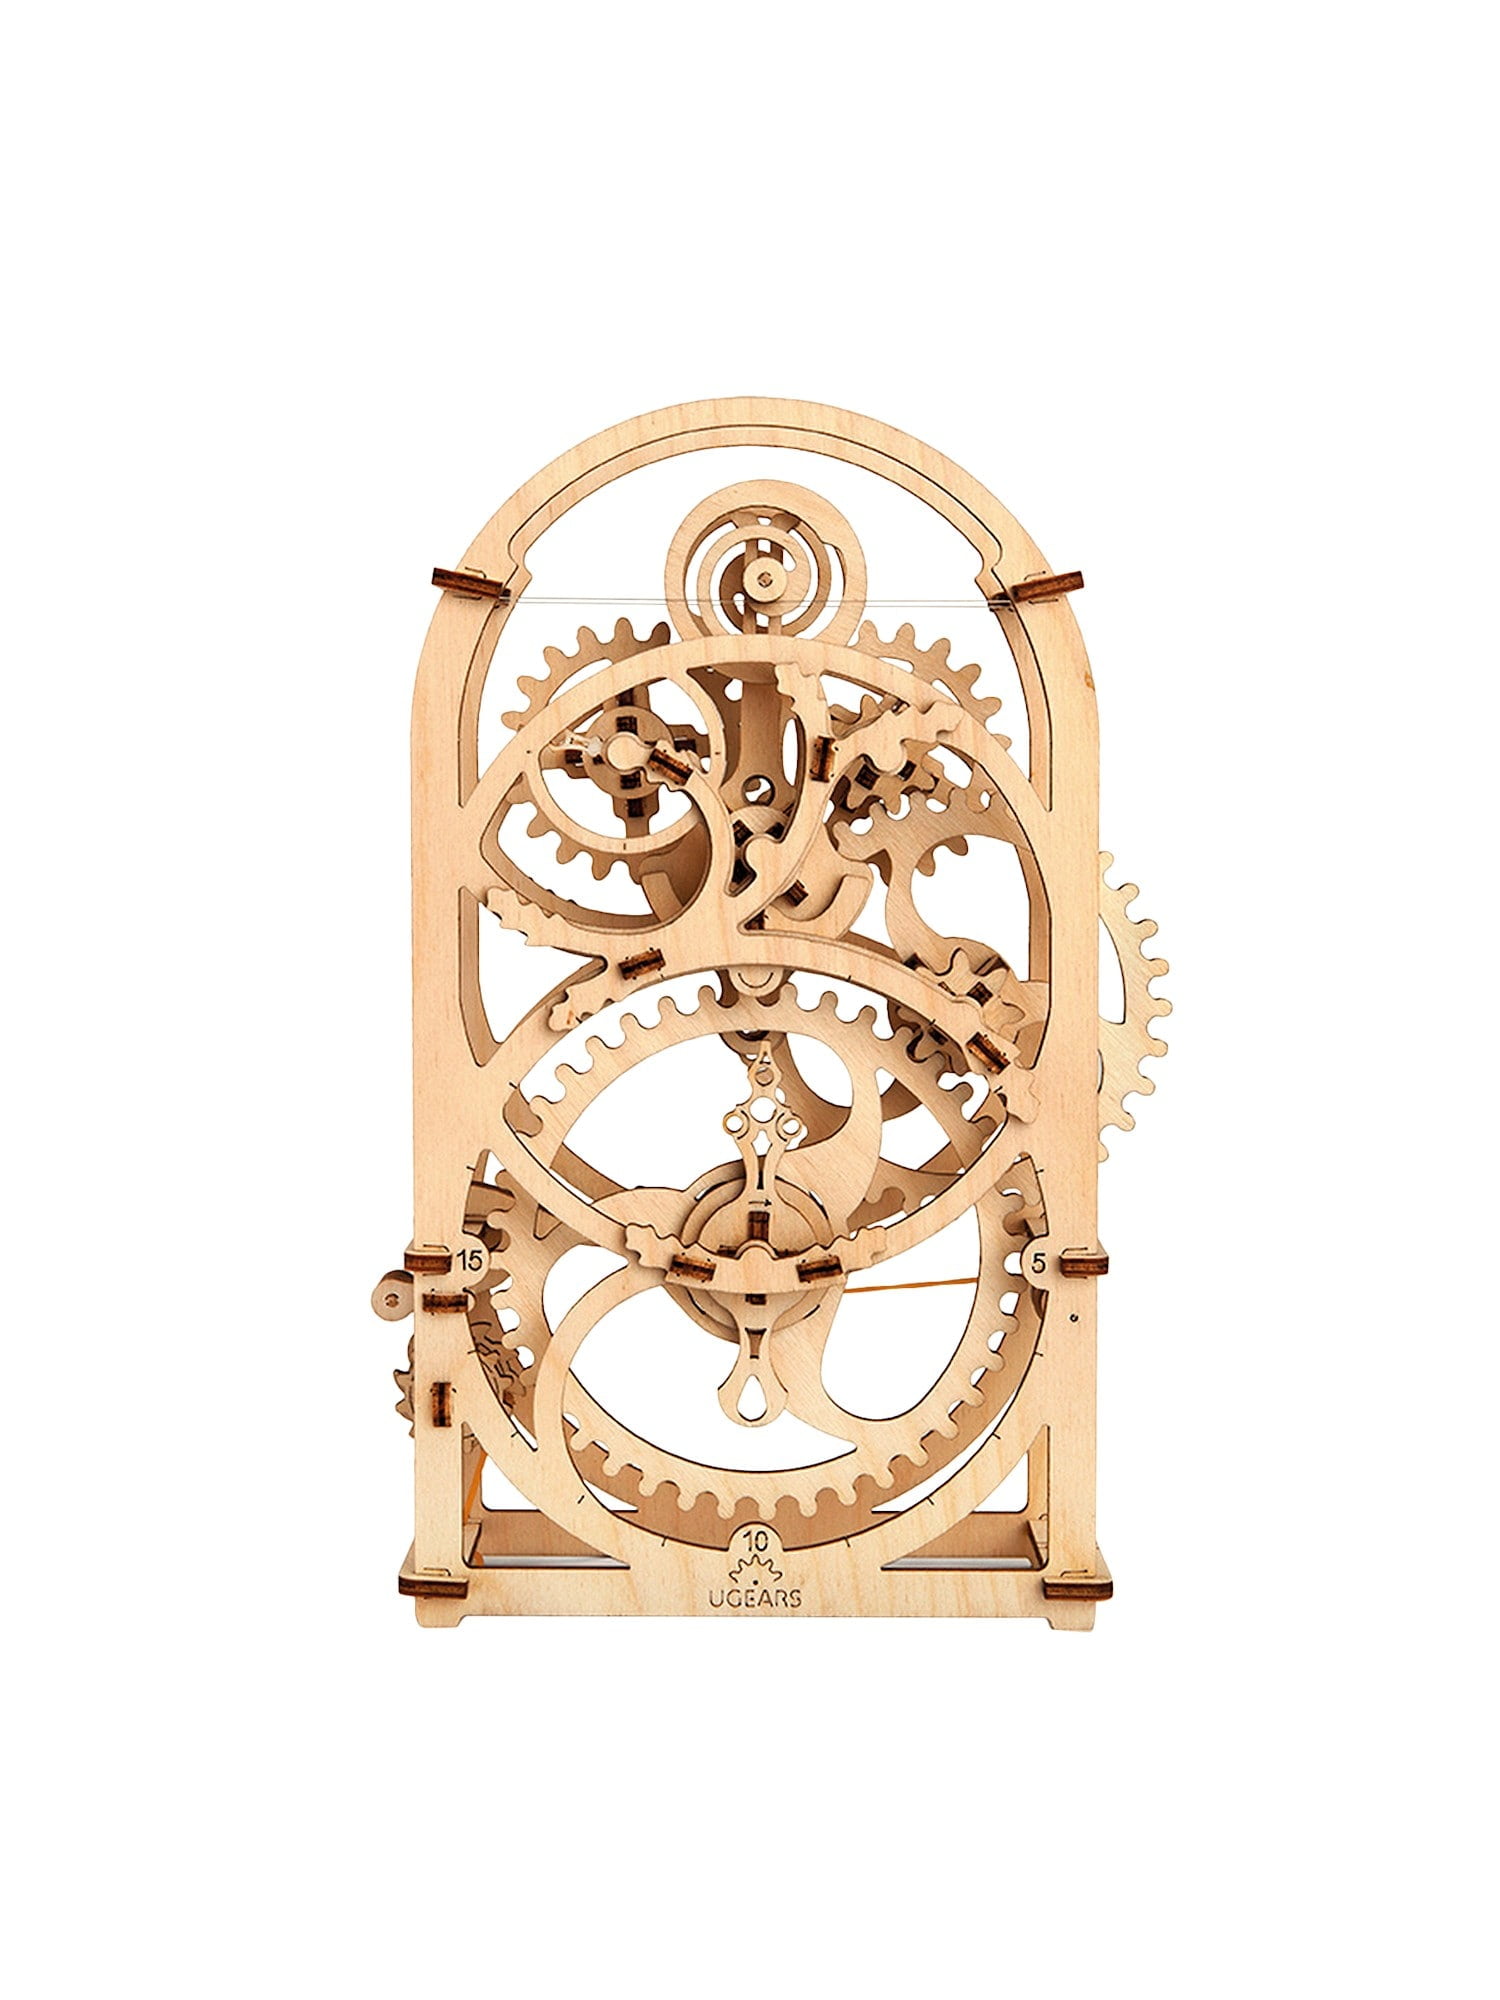 Safe 3DWooden Puzzles/Mechanical Propelled Model UGears 